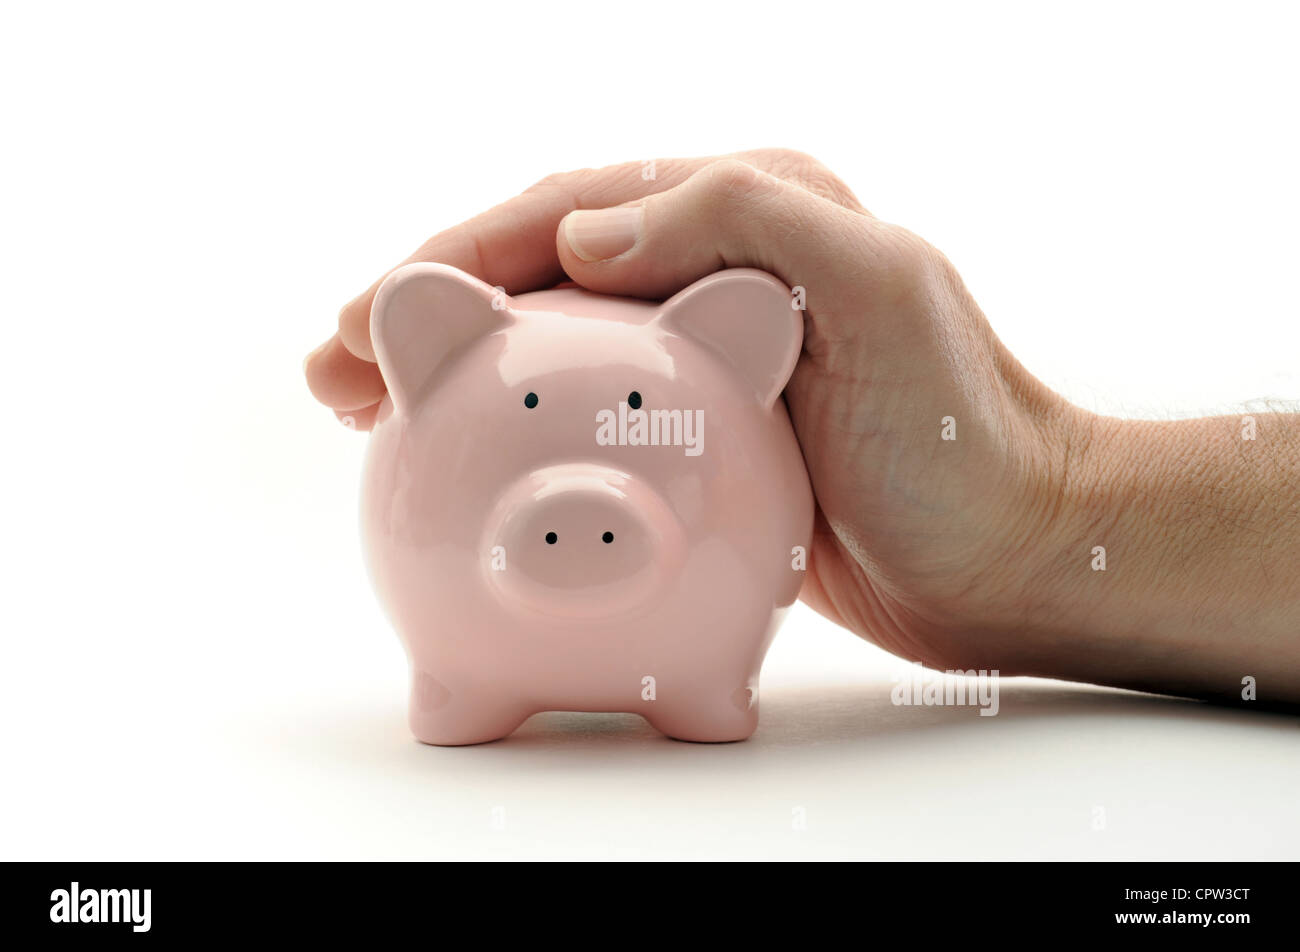 PIGGYBANK PIGGY BANK  PROTECTED BY MANS HAND RE INCOMES WAGES SAVINGS INTEREST RATES PENSIONS RETIREMENT COST OF LIVING BILLS UK Stock Photo